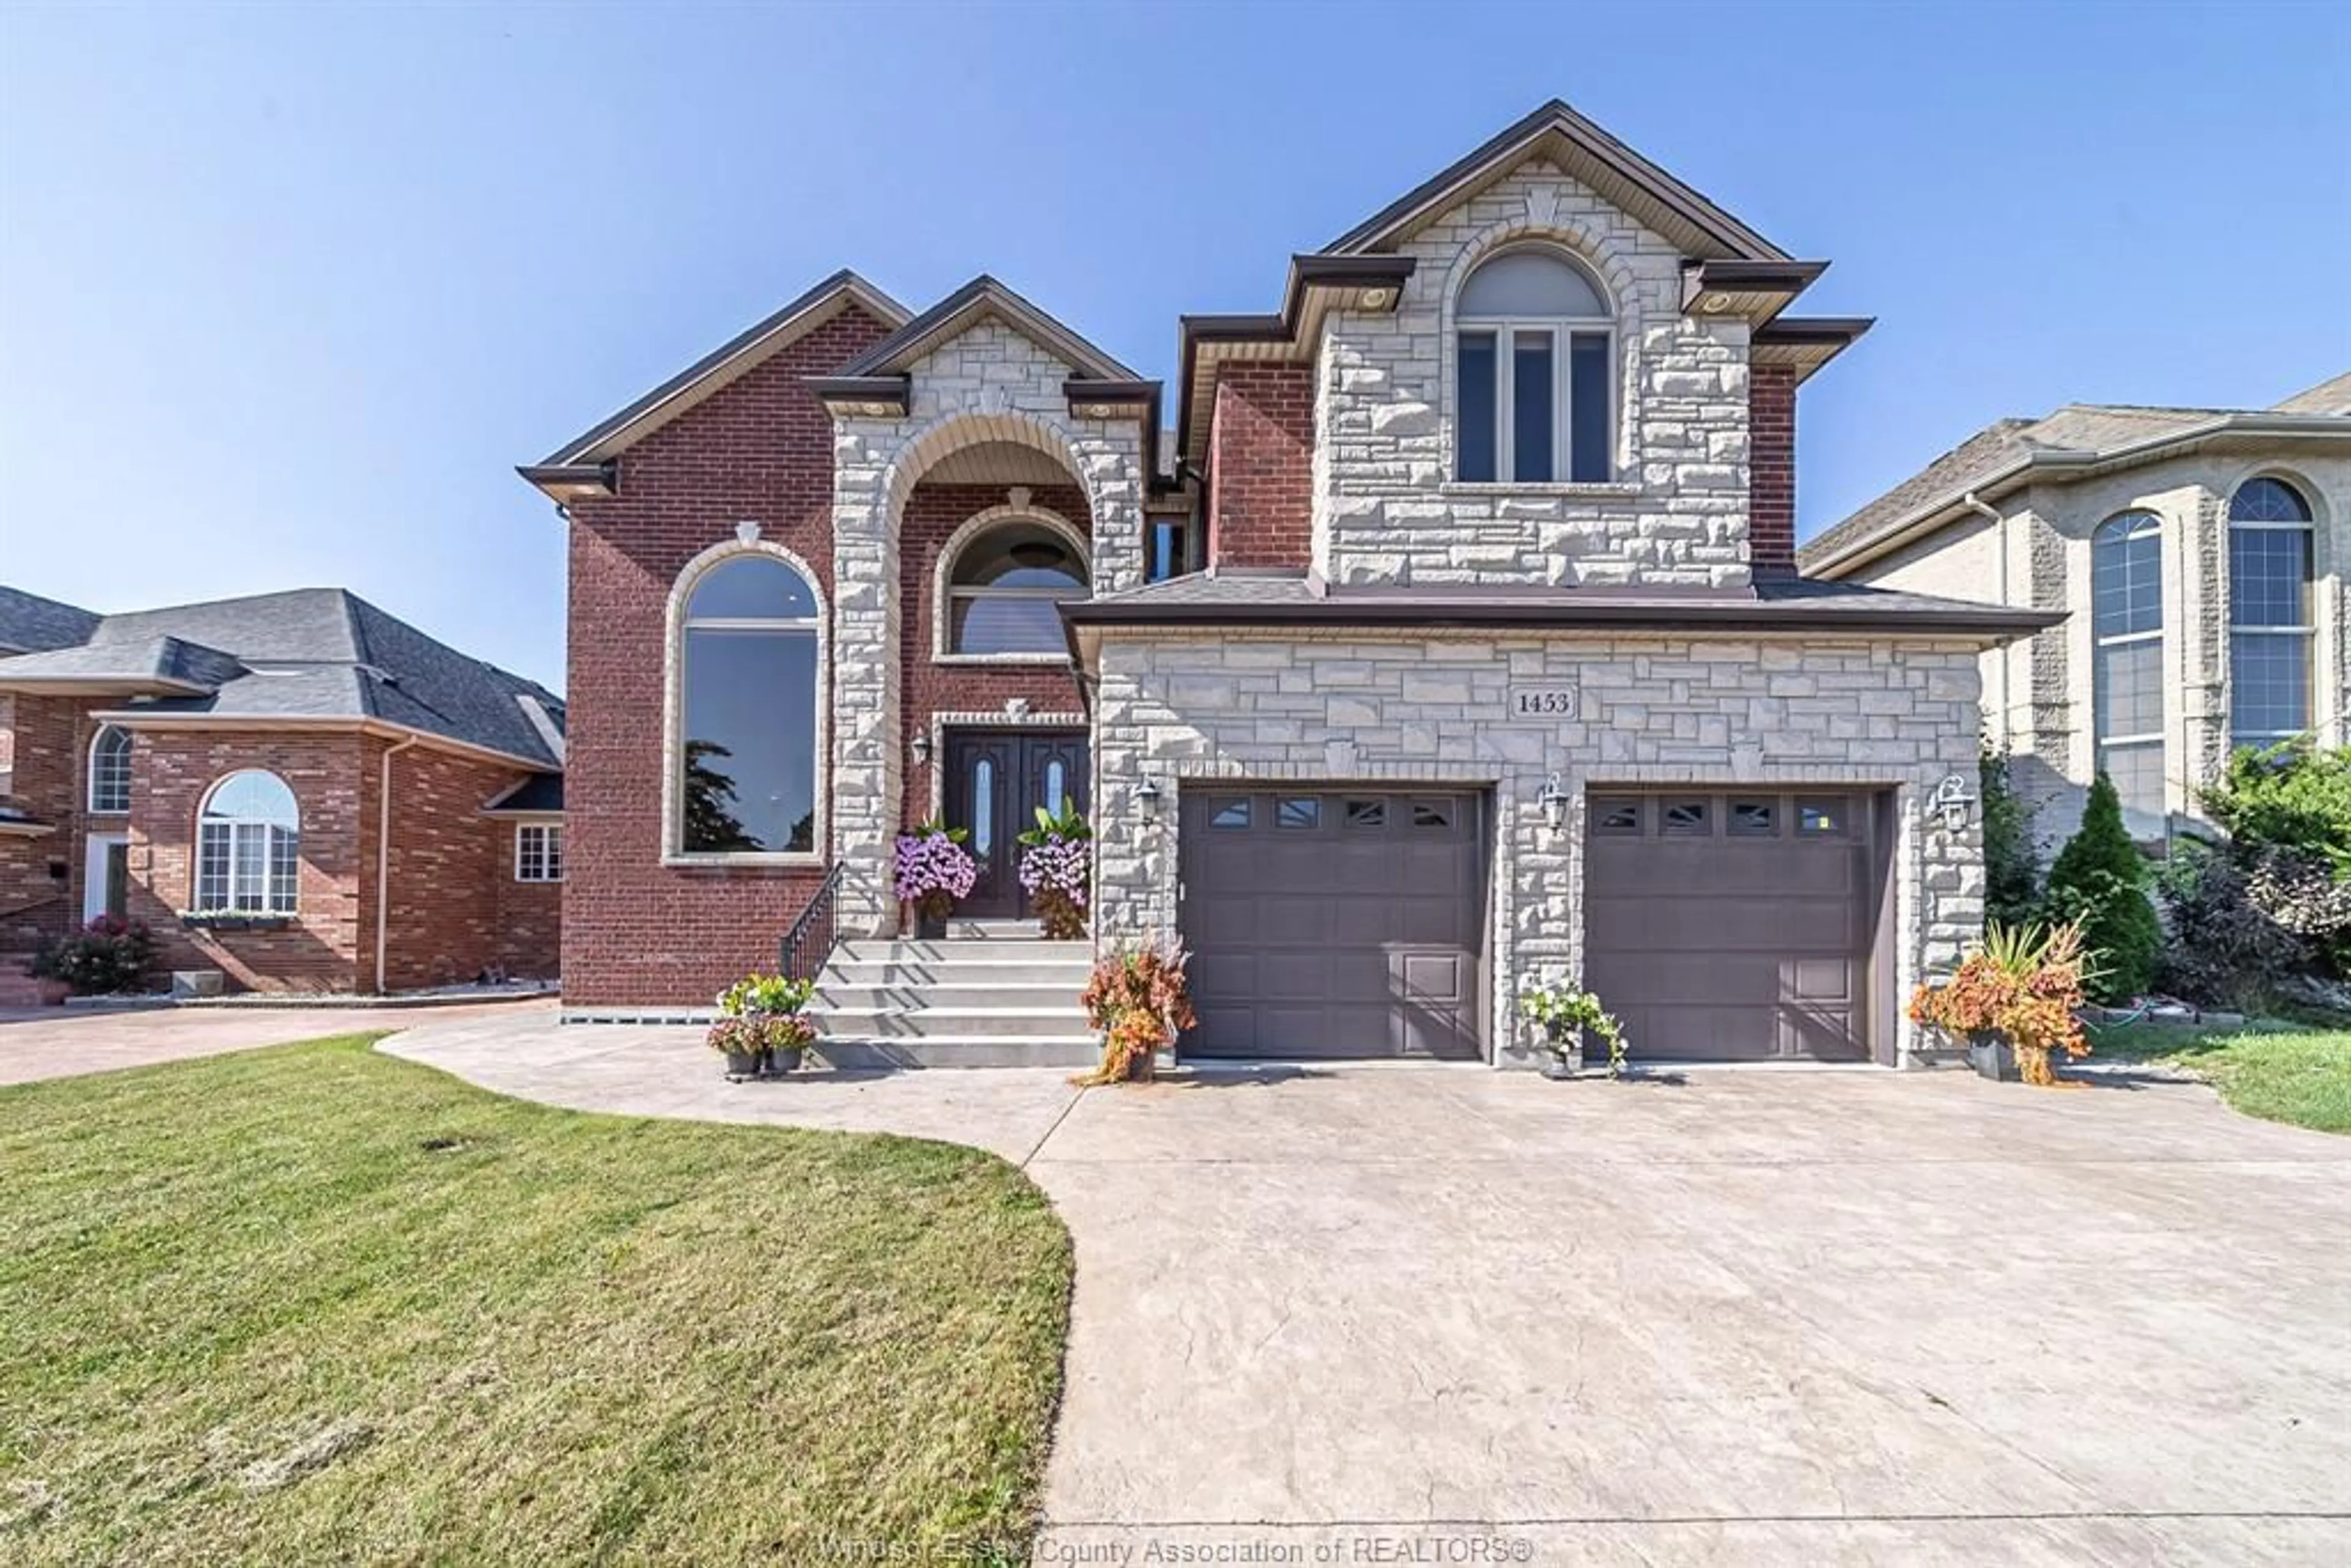 Home with brick exterior material for 1453 STONEYBROOK, Windsor Ontario N9G 2Z4